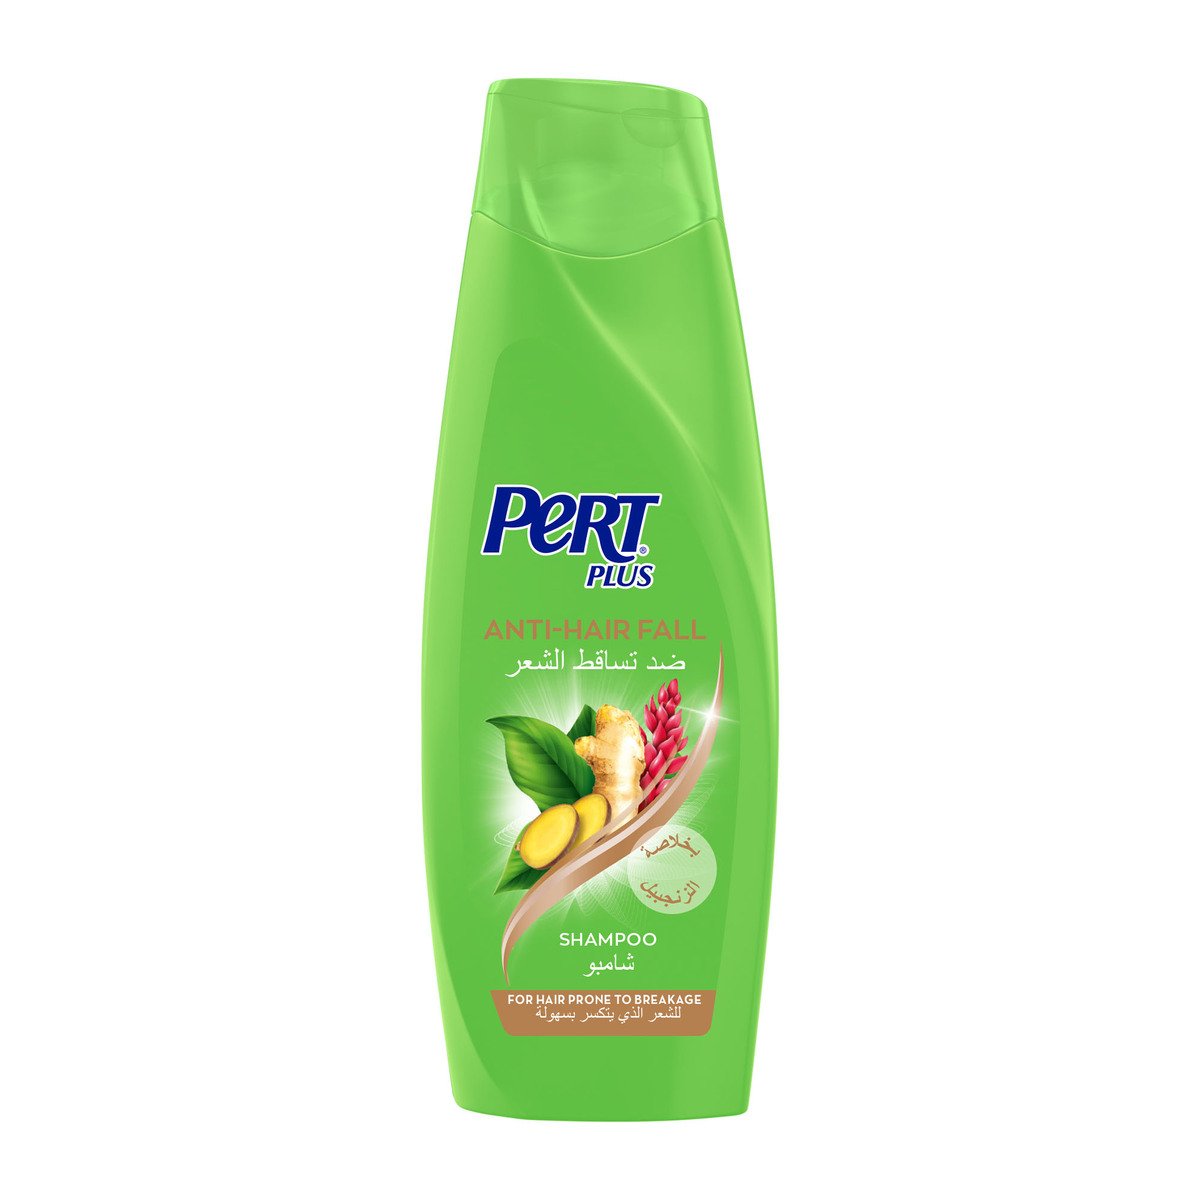 Pert Plus Anti-Hair Fall Shampoo with Ginger Extract 200 ml